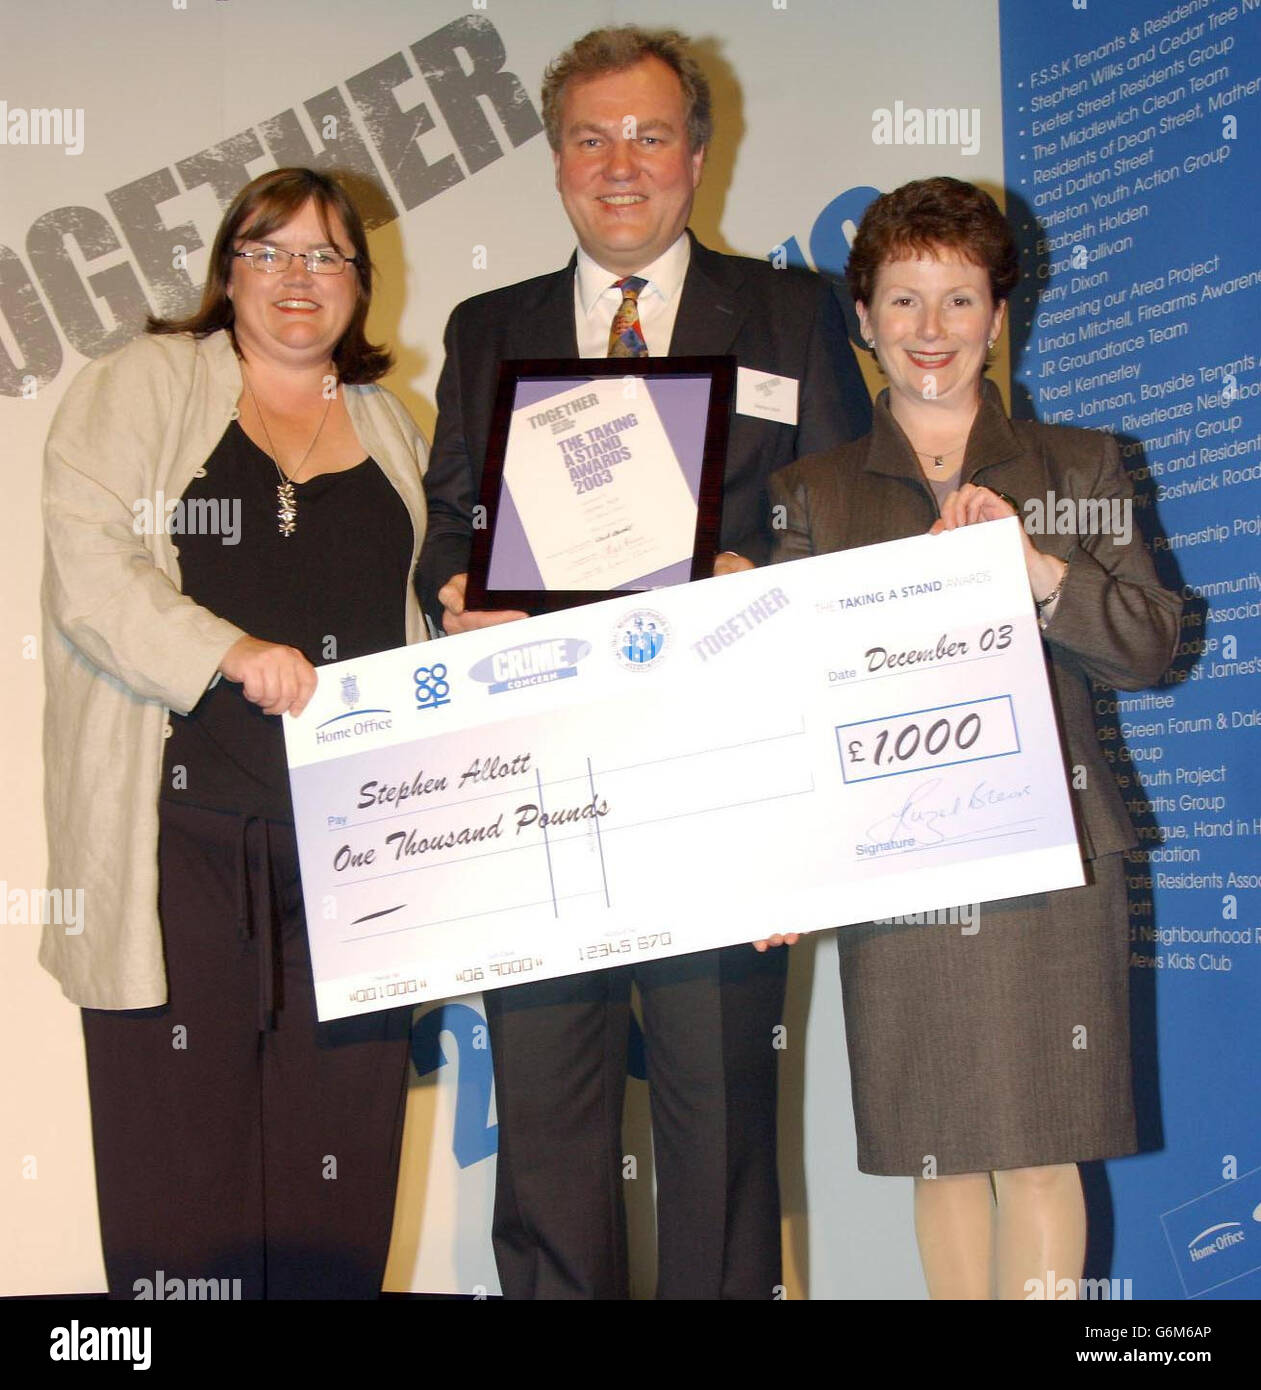 Taking a Stand Awards at the House of Commons. Stephen Allott of Clapham, London, receives his award from Director of Anti-Social Behaviour at the Home Office, Louise Casey (left) and Home Office Minister Hazel Blears. Stock Photo